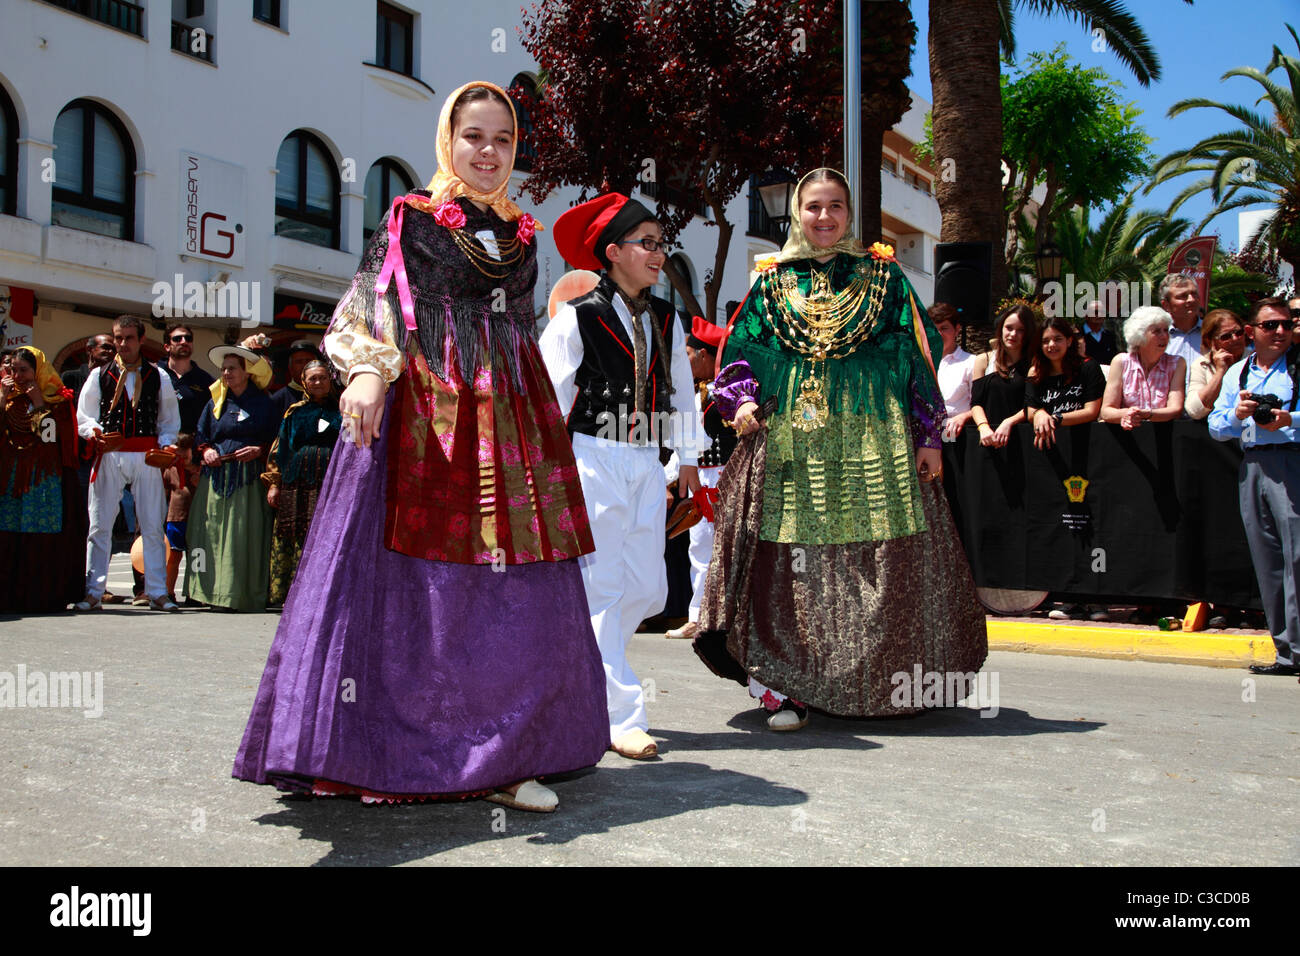 Members of a folklore group performing traditional dances, Ibiza, Spain Stock Photo